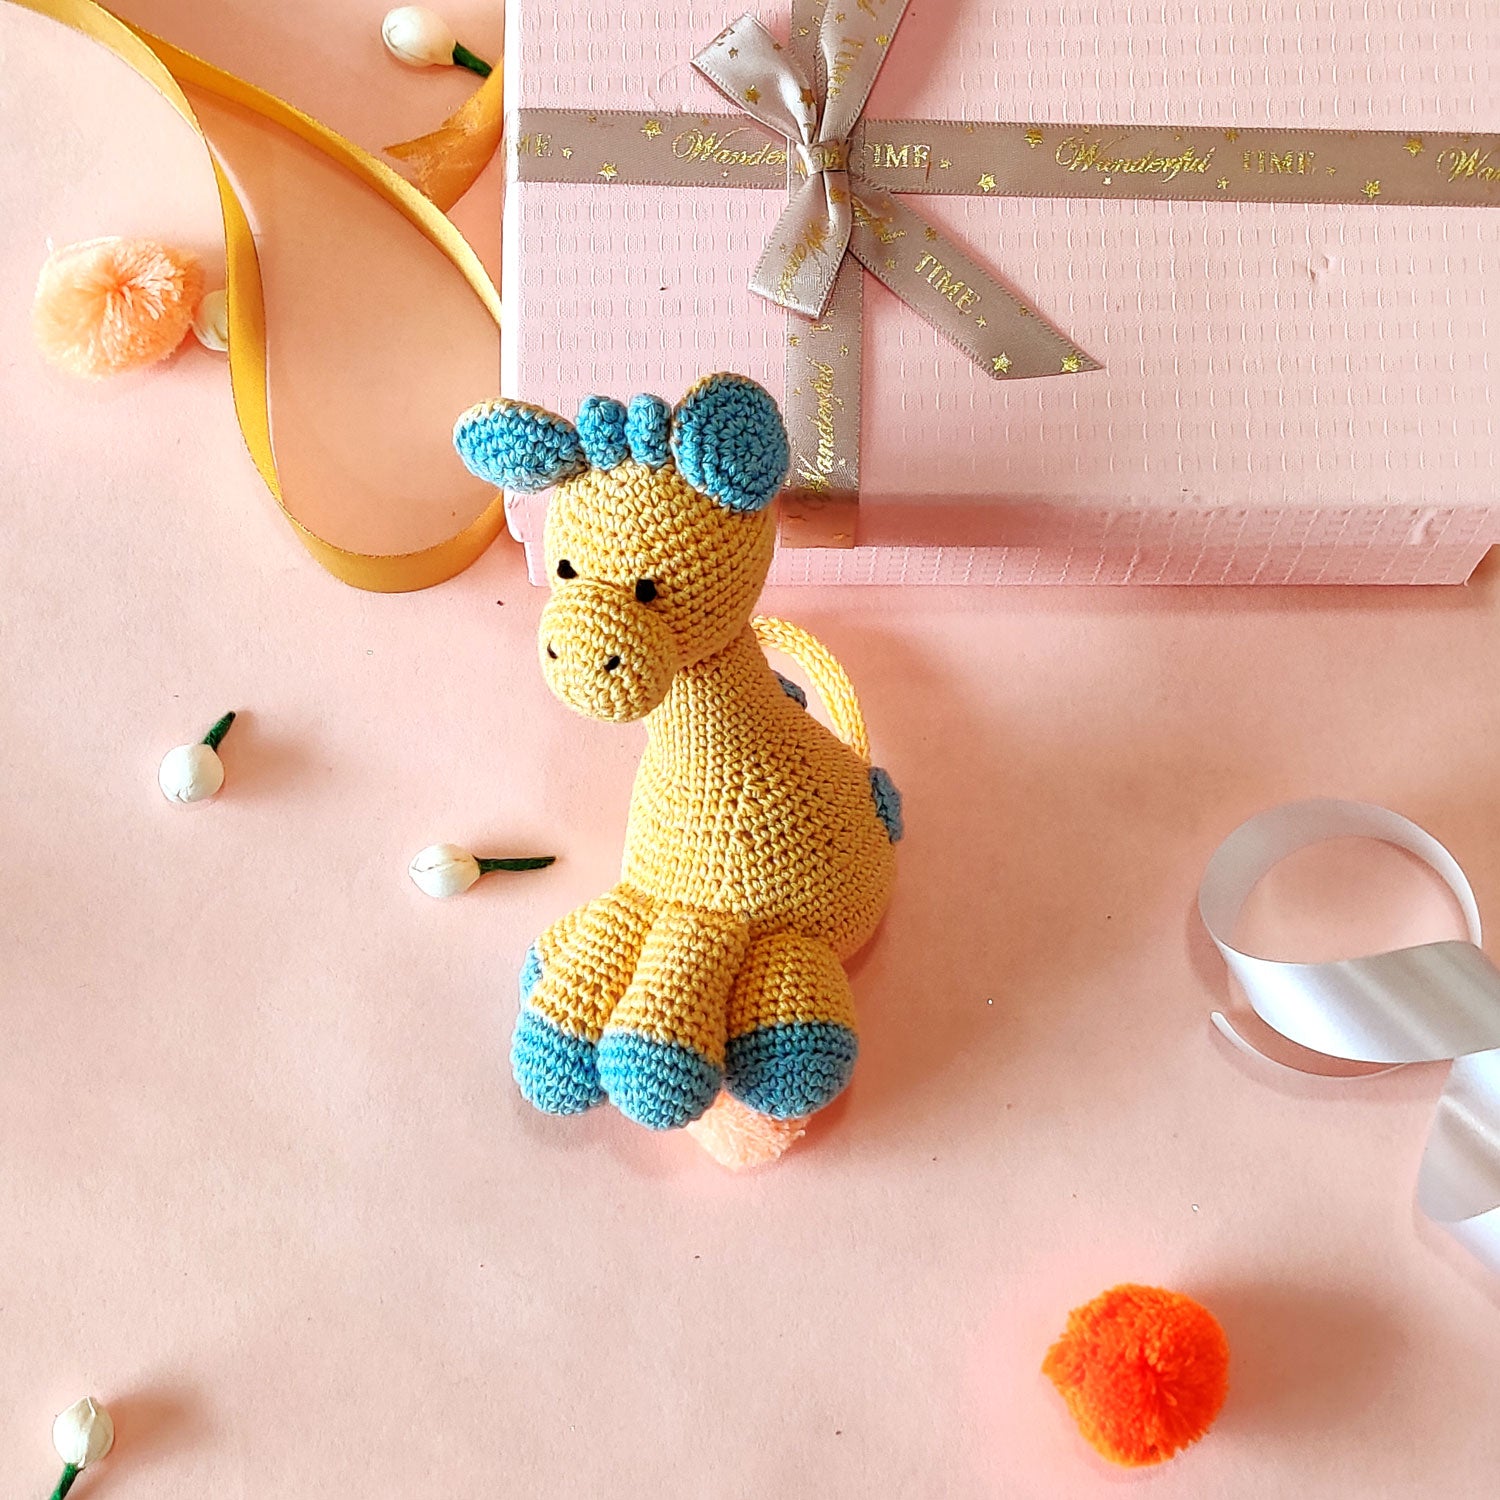 Clever Giraffe Crochet Toy  - 7 inches tall | Peacoy